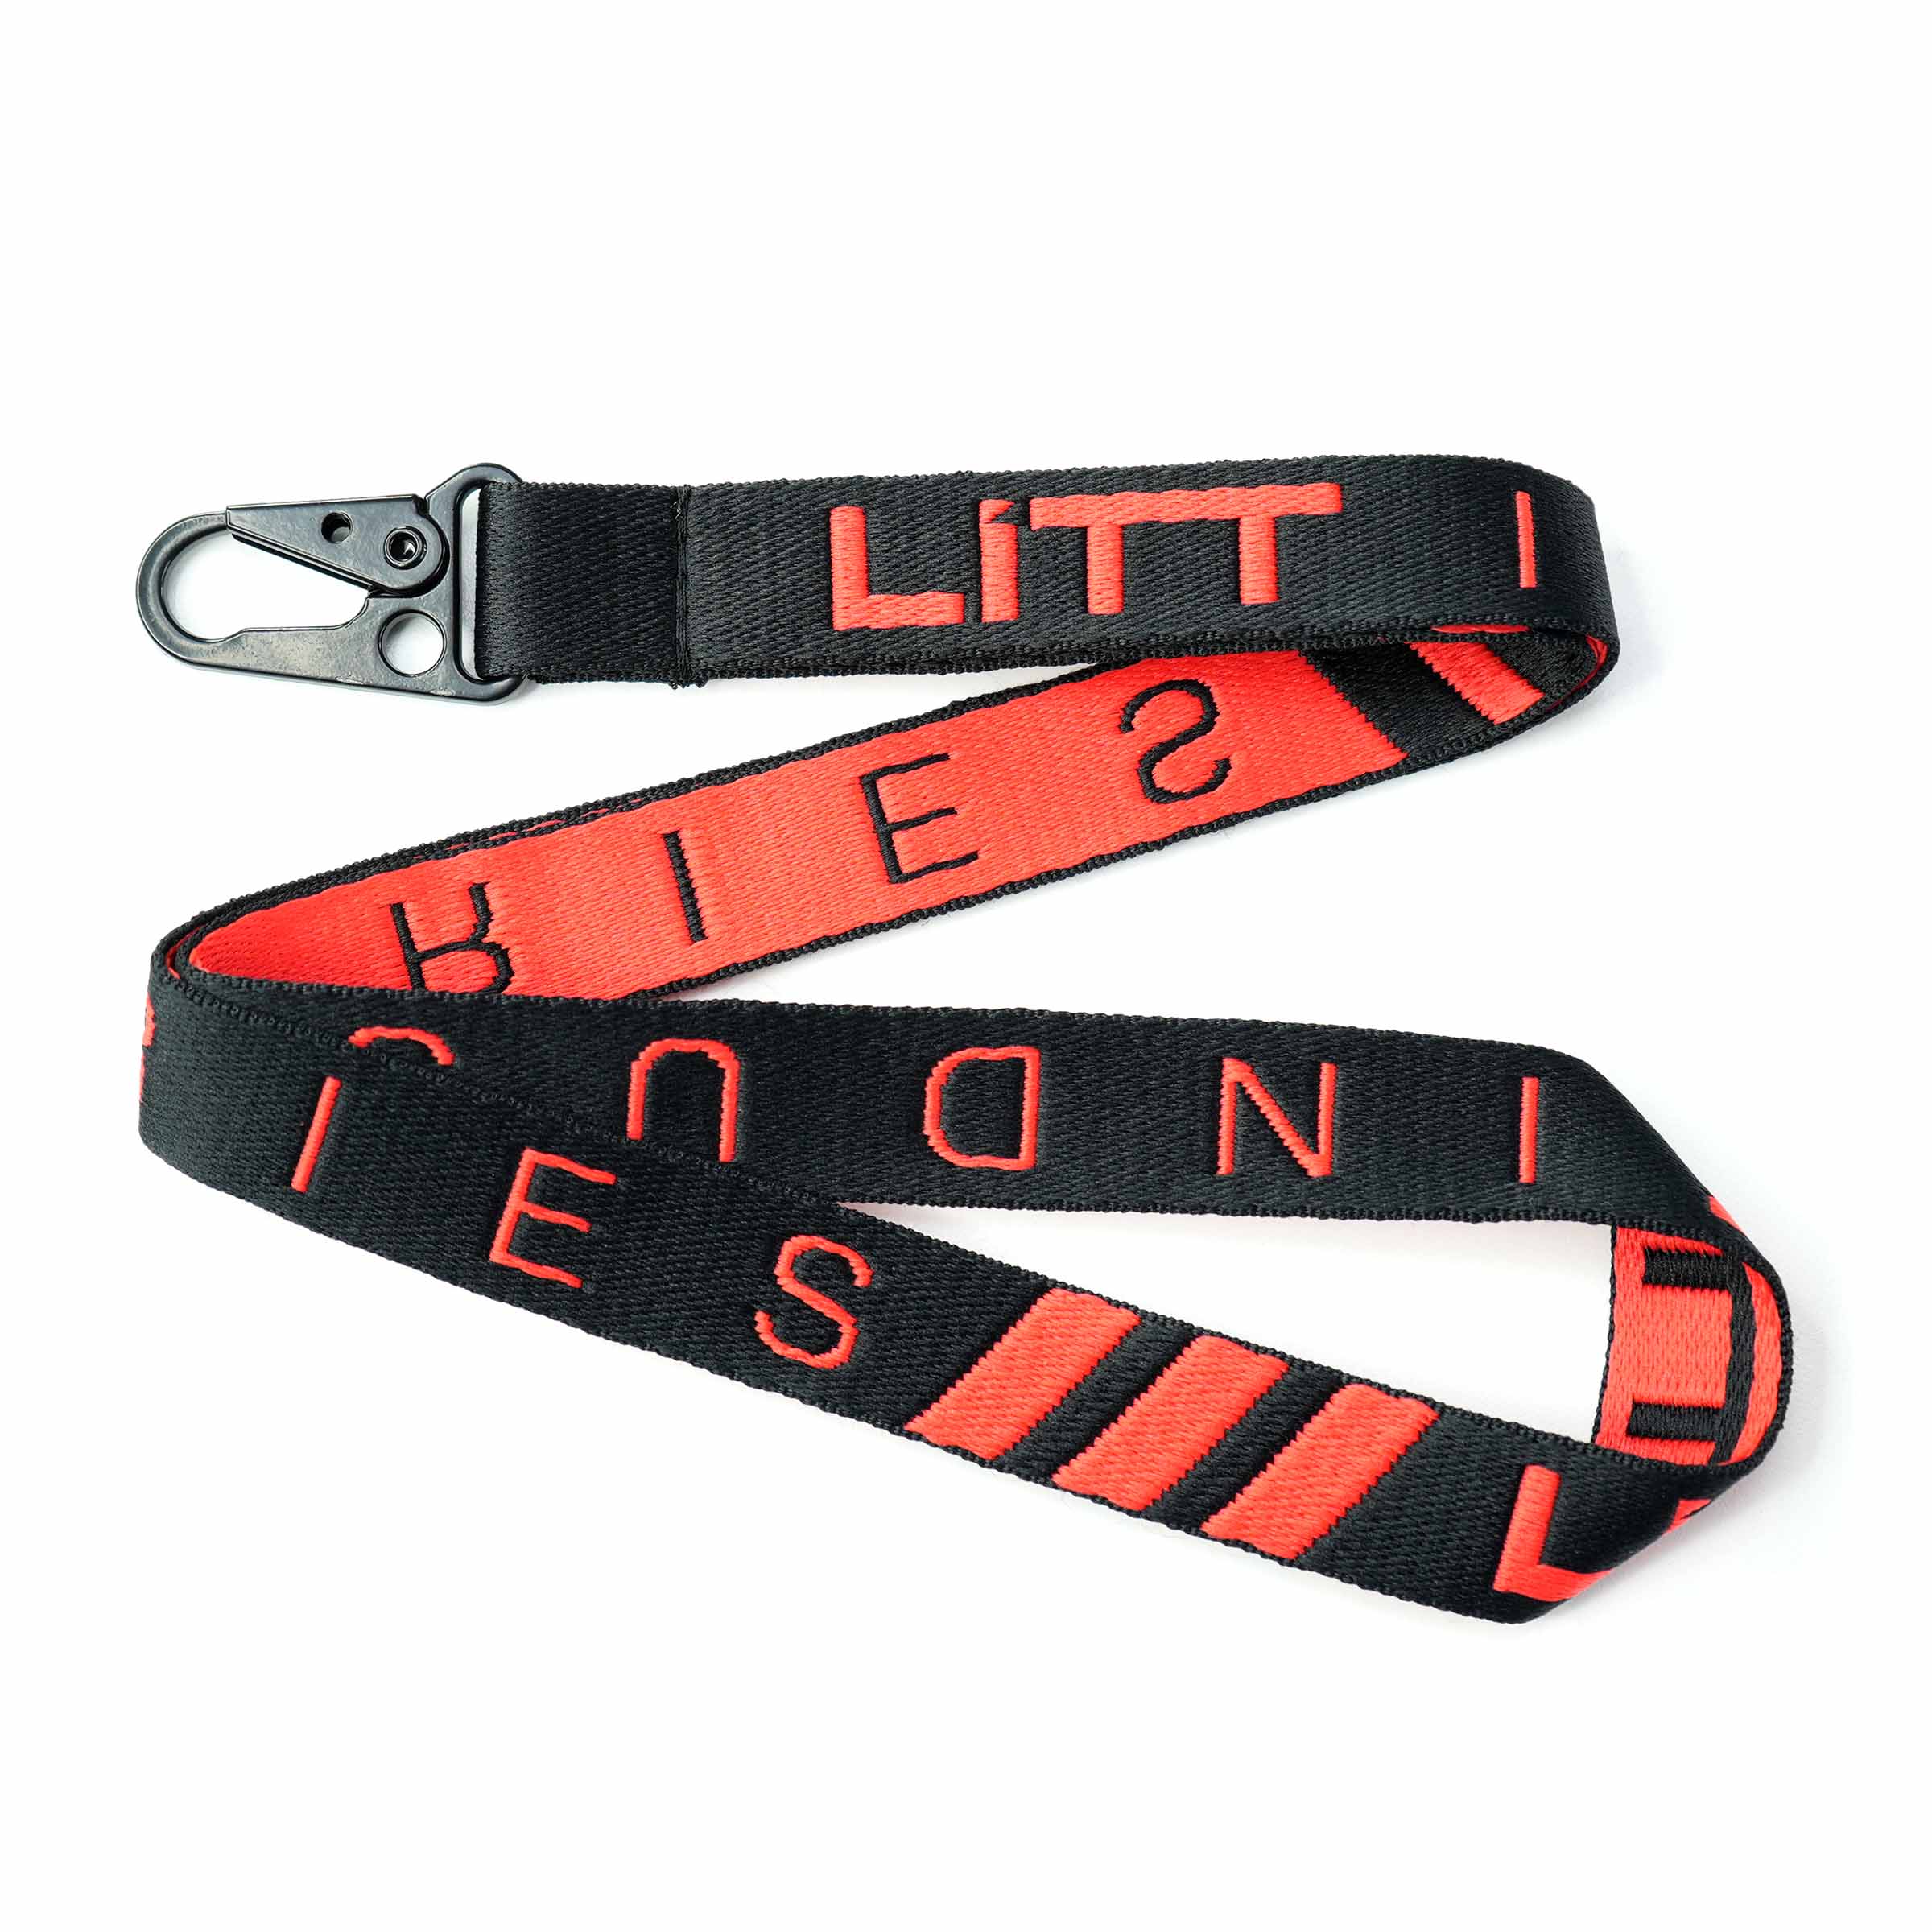 Litt Industries high quality heavy duty durable lanyards red yellow or white metal clip for extra security the best lanyards on the market red racing stripes